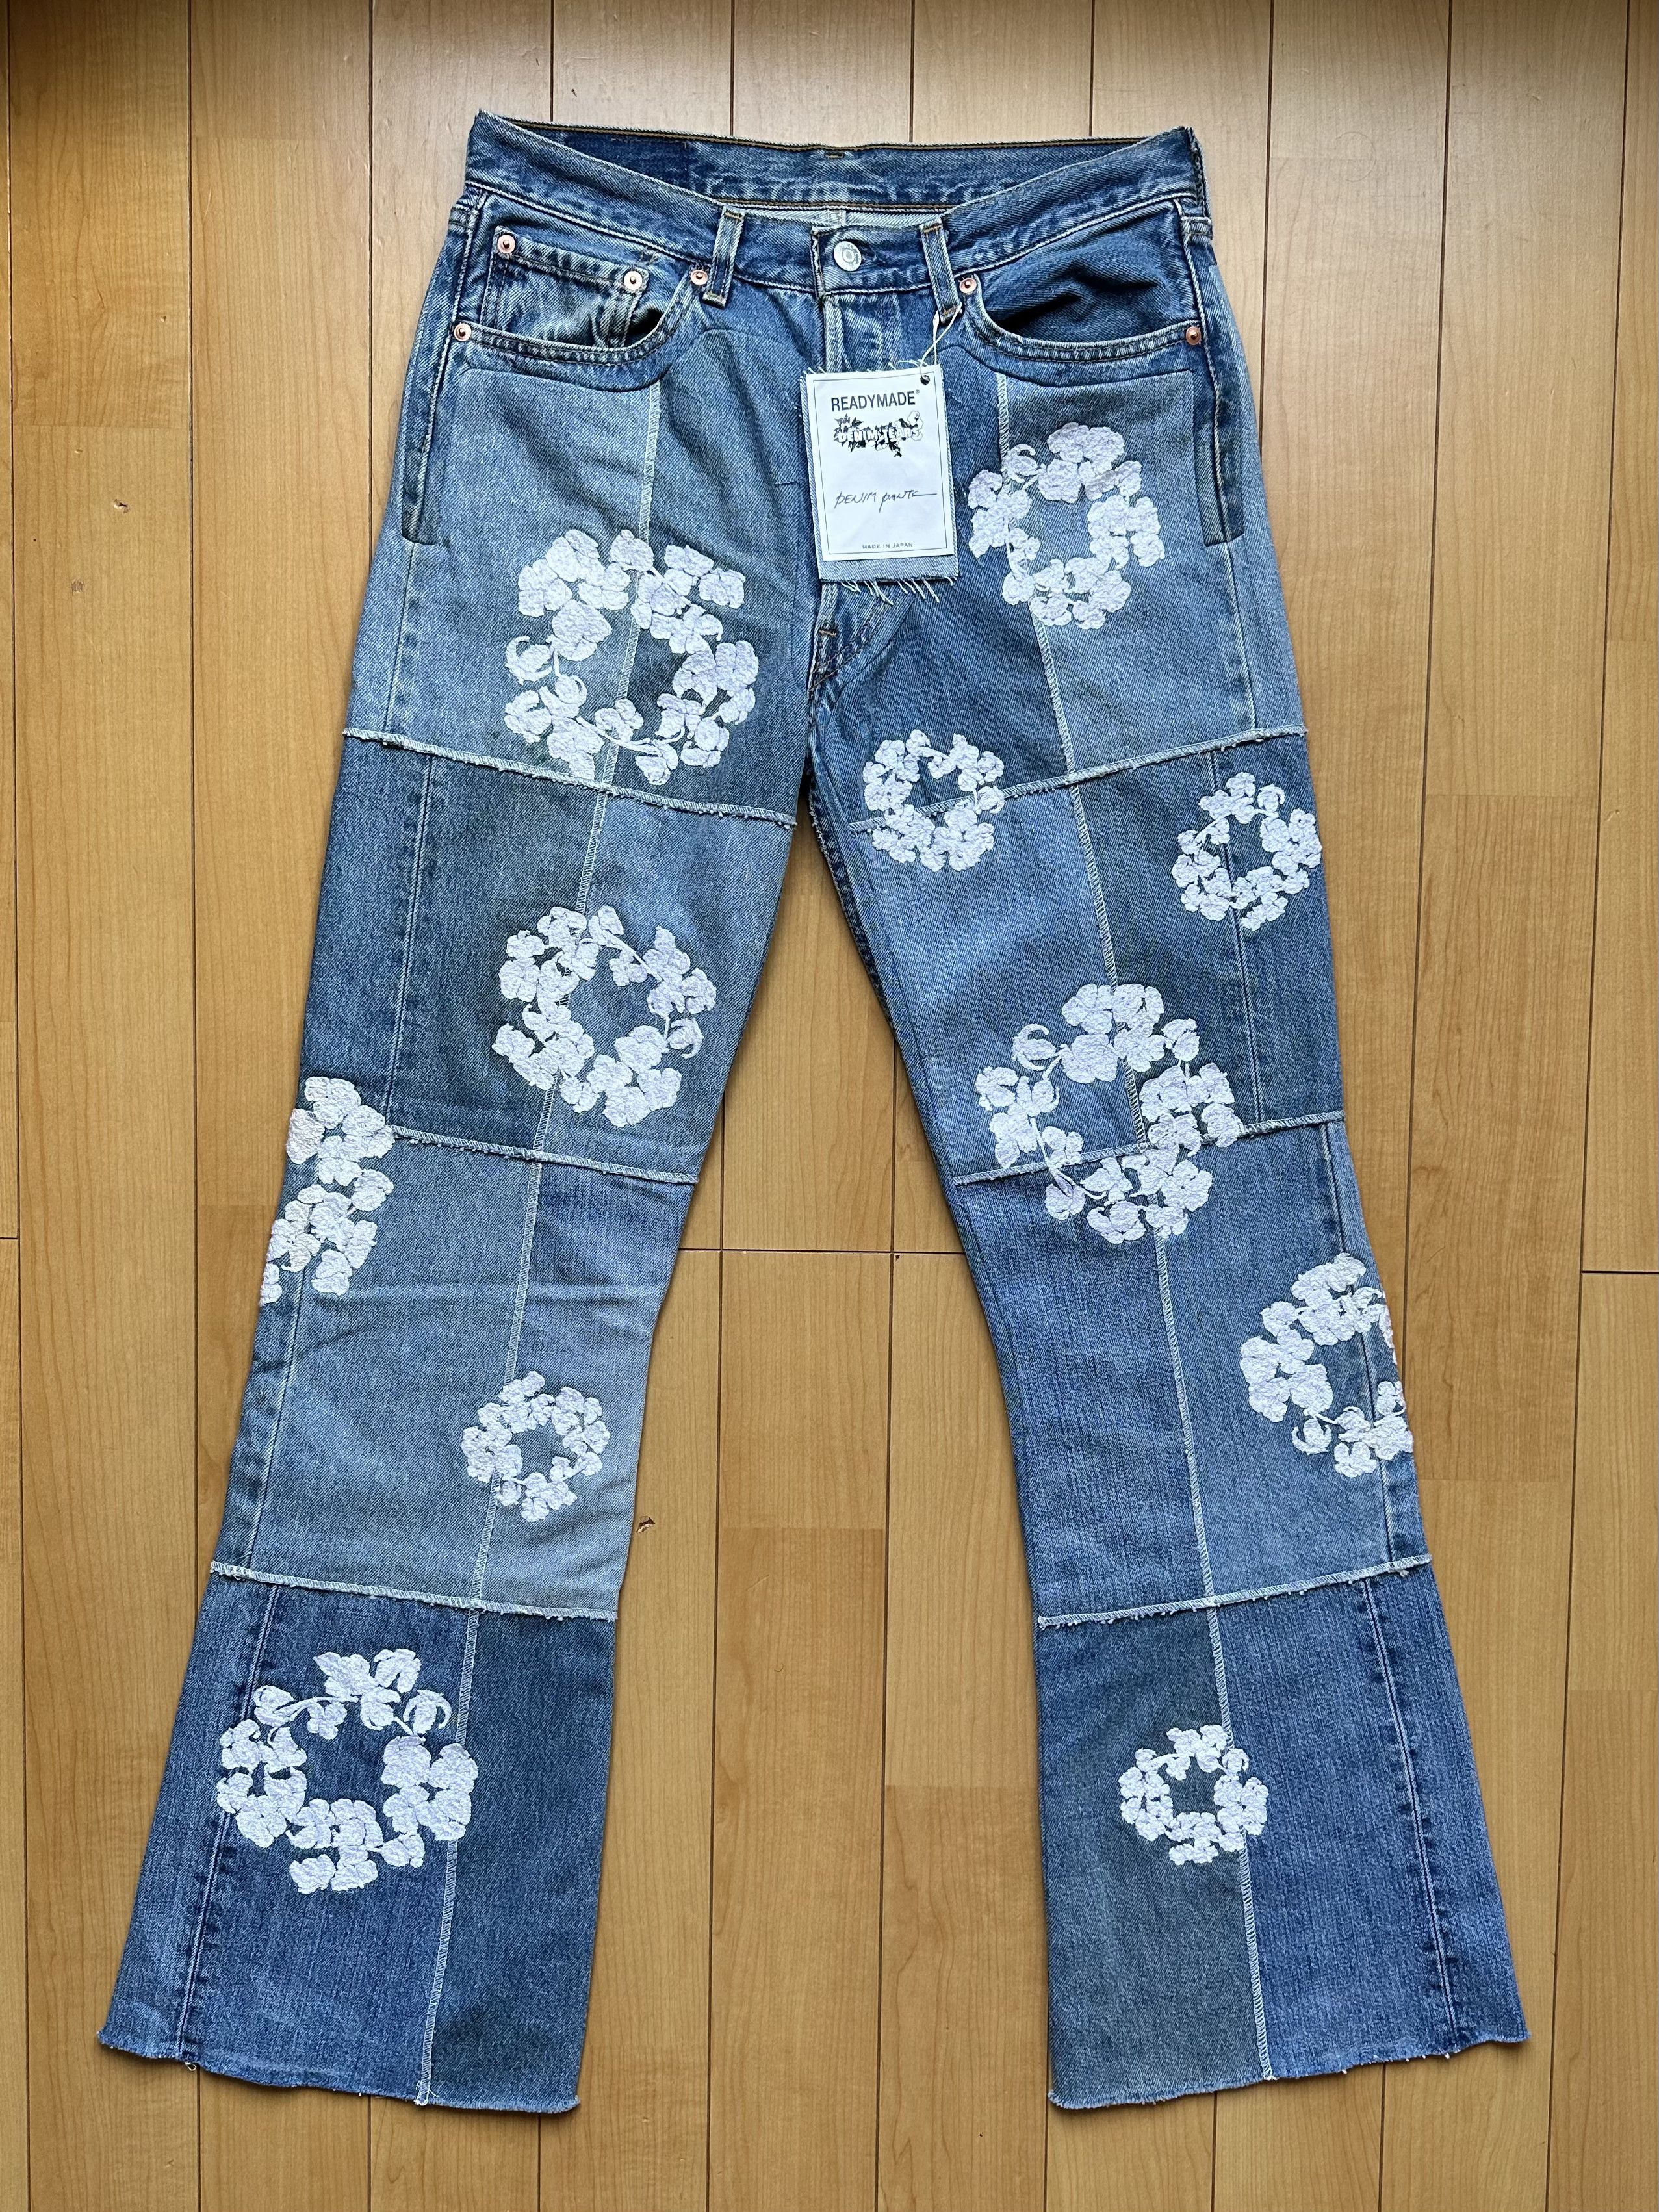 READYMADE Readymade Denim Tears Cotton Wreath Embroidered Jeans 